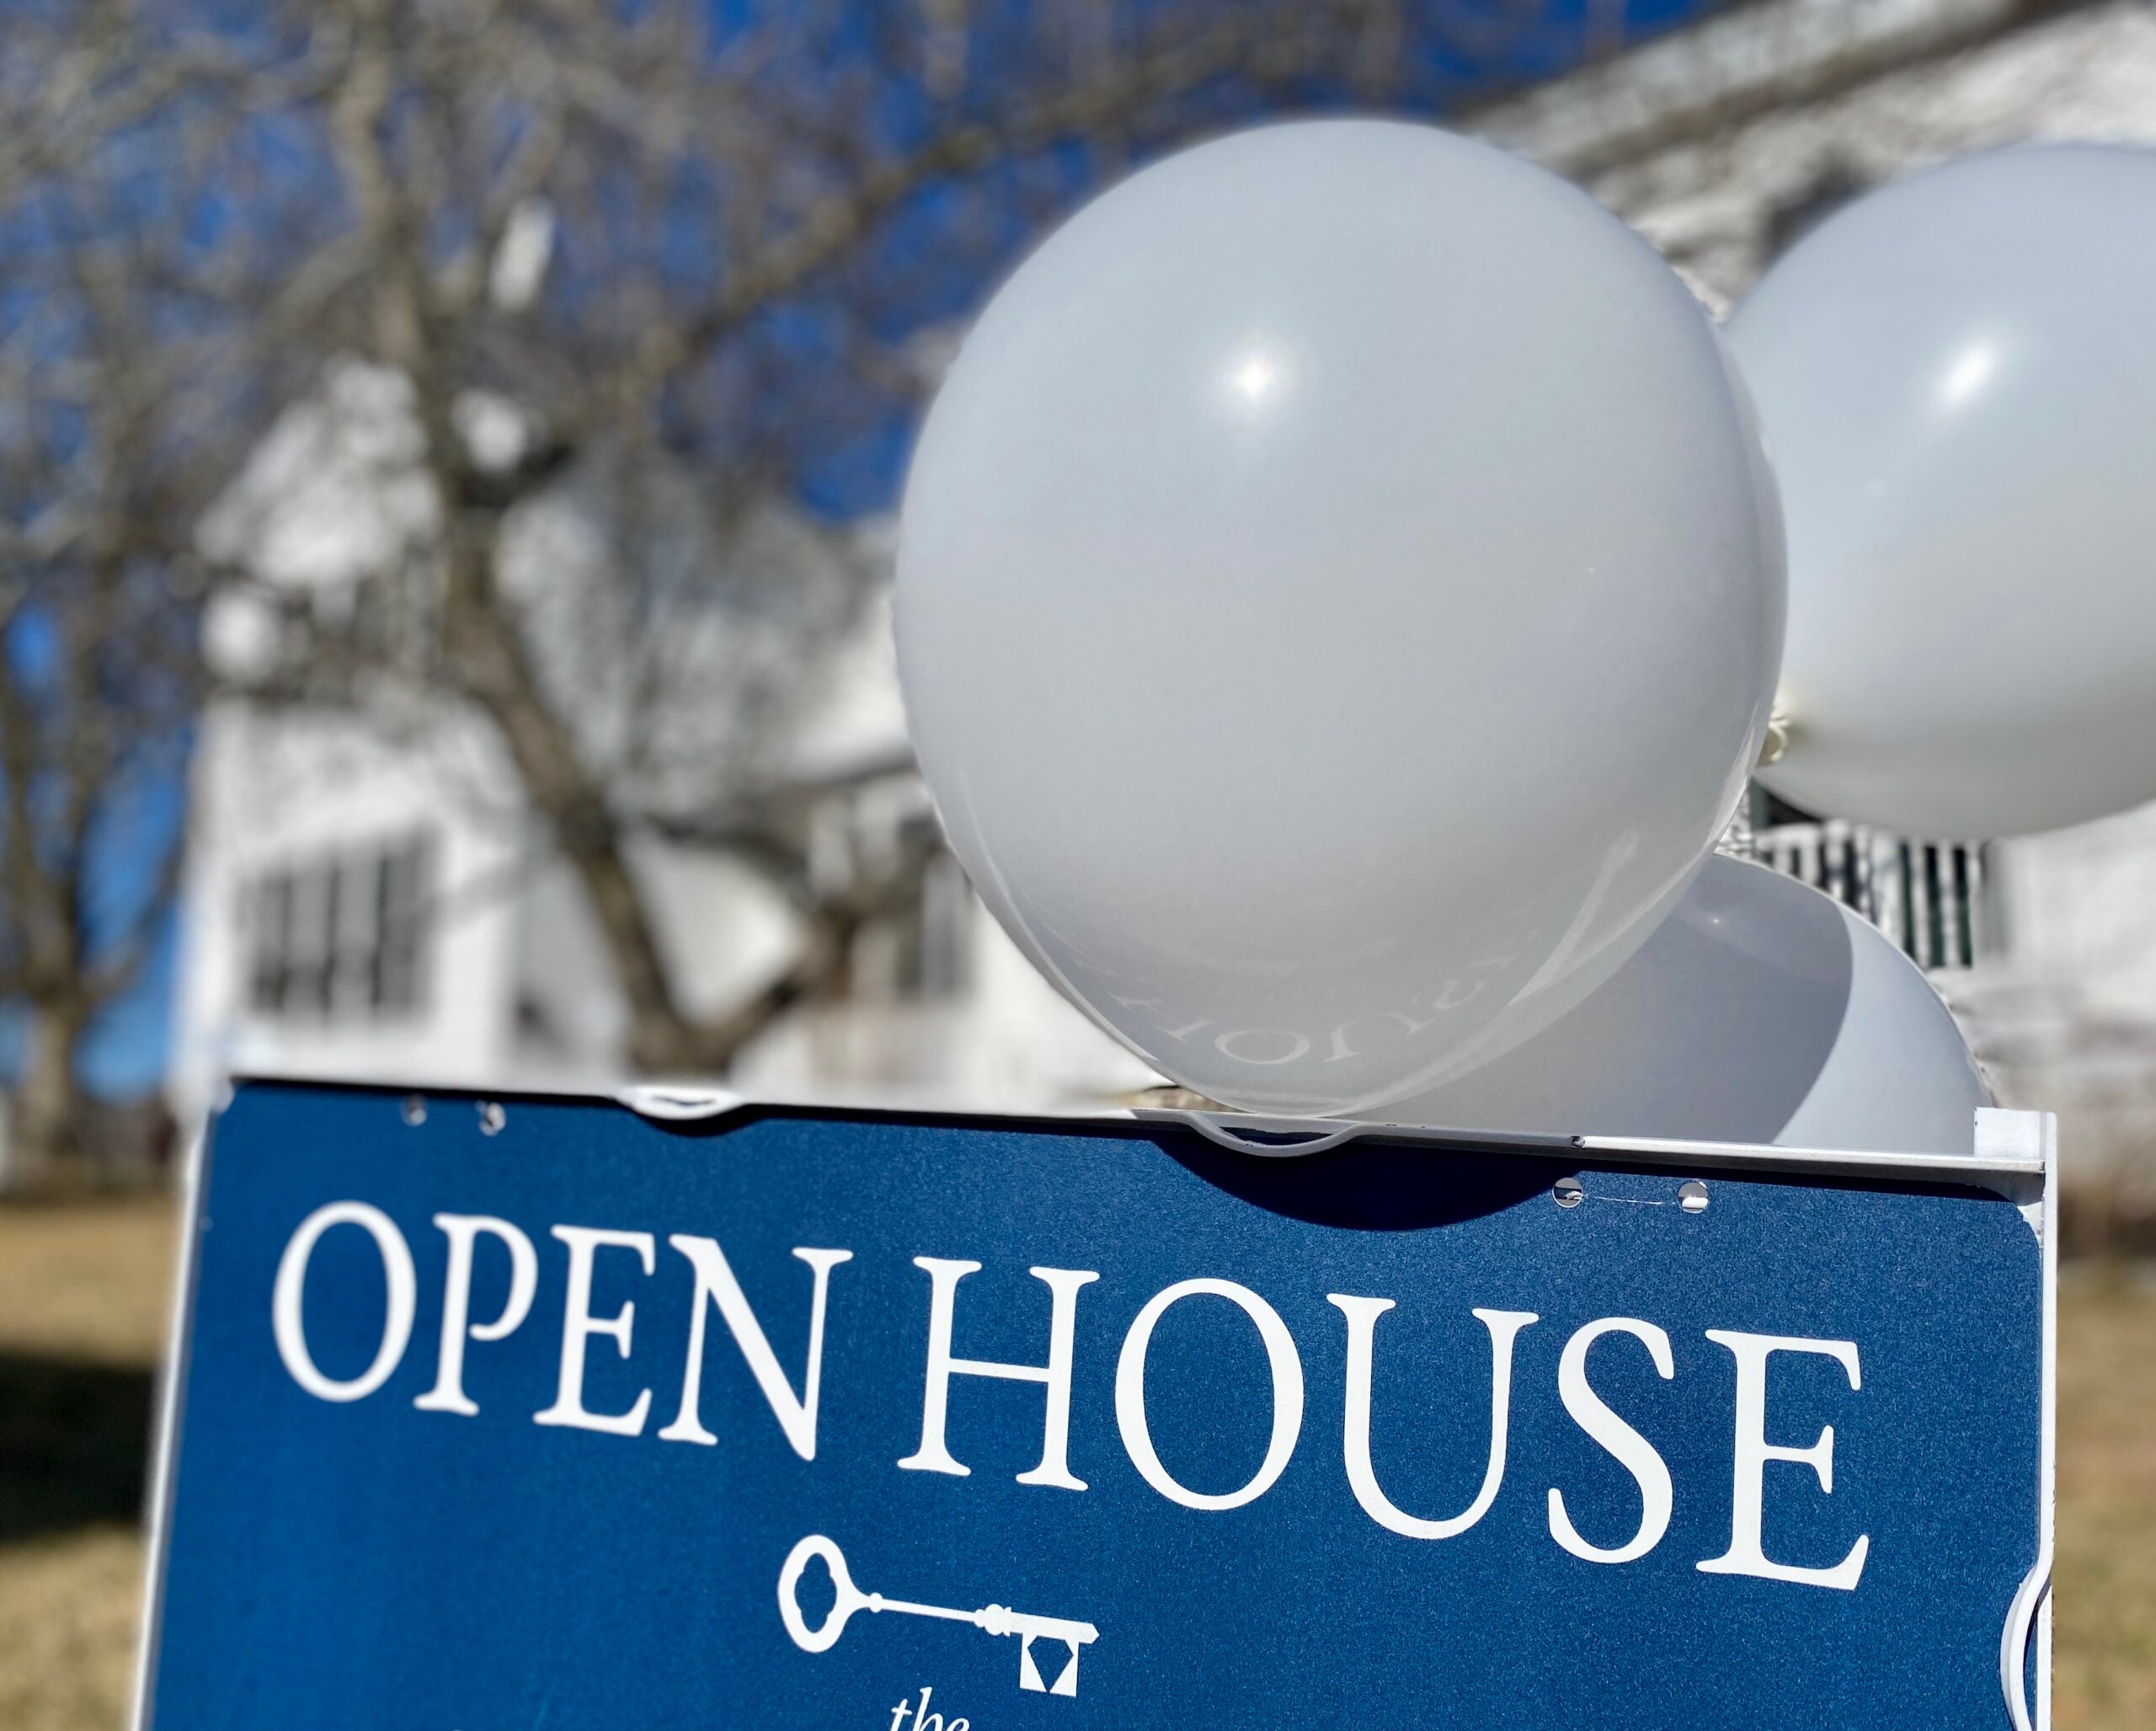 An open house sign with white lettering on a blue background. Balloons float overhead.